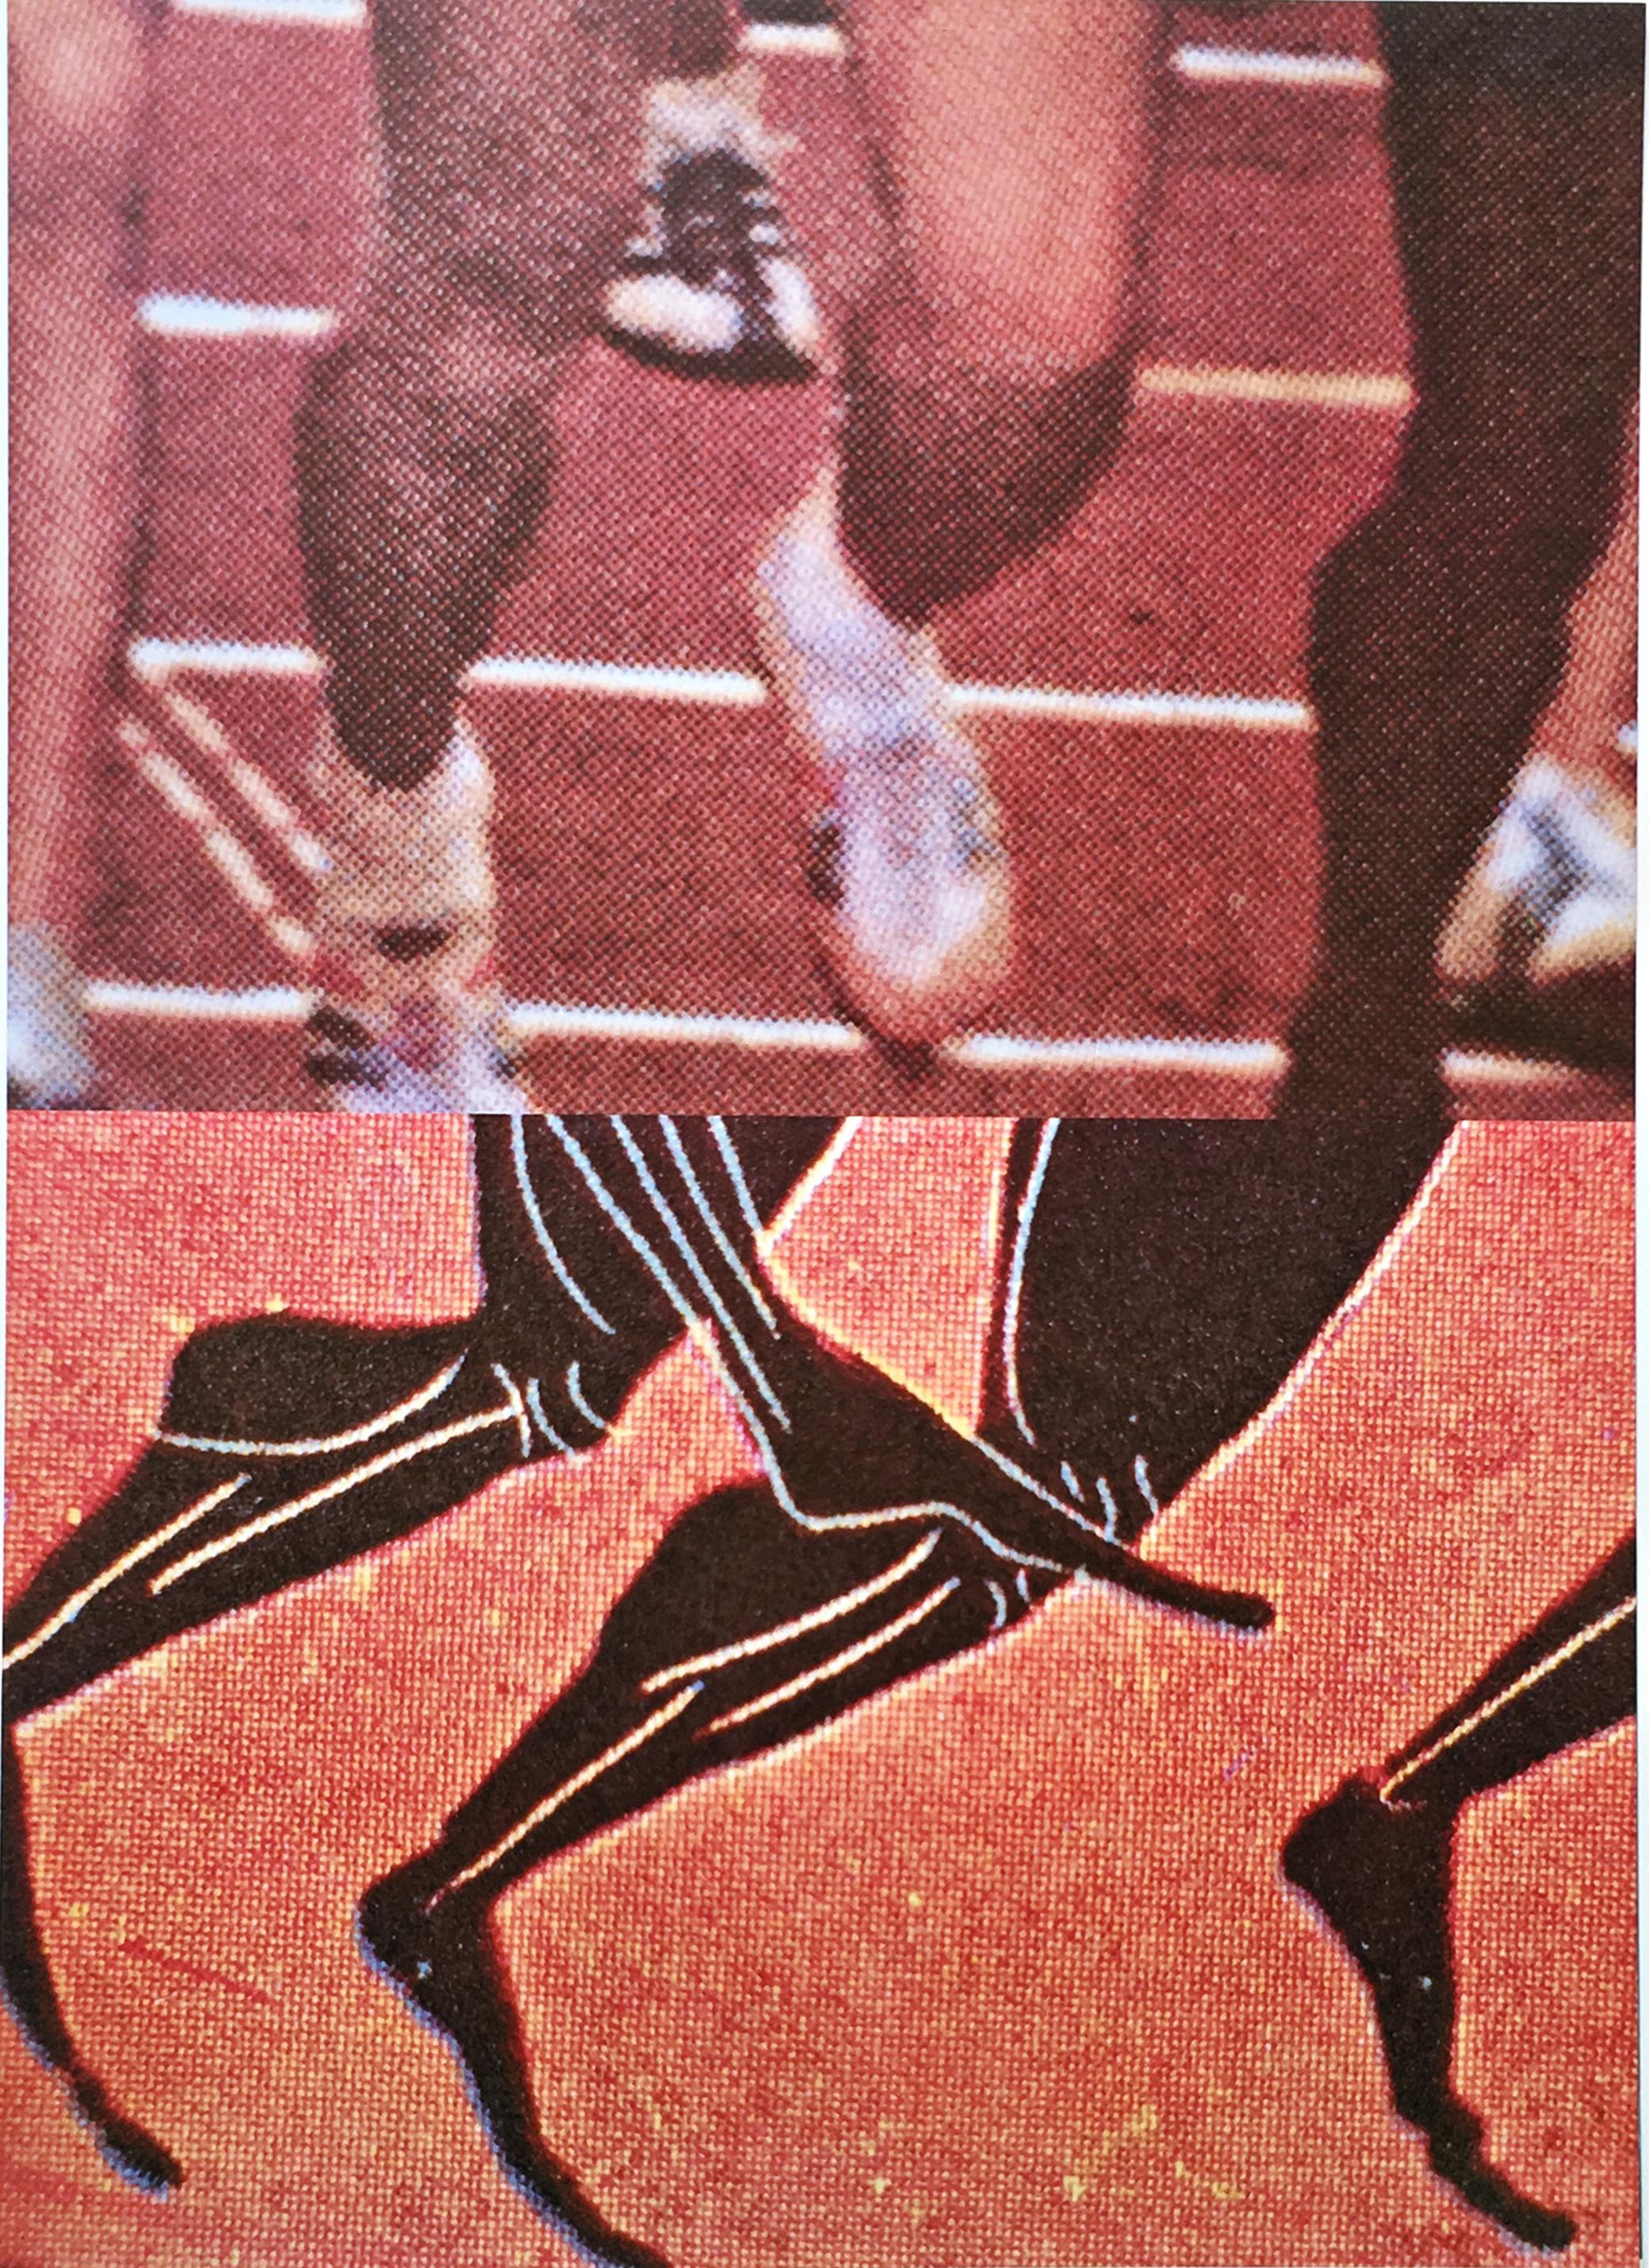 The Sprinters, for the 1984 Los Angeles Olympics, with official COA - Print by John Baldessari